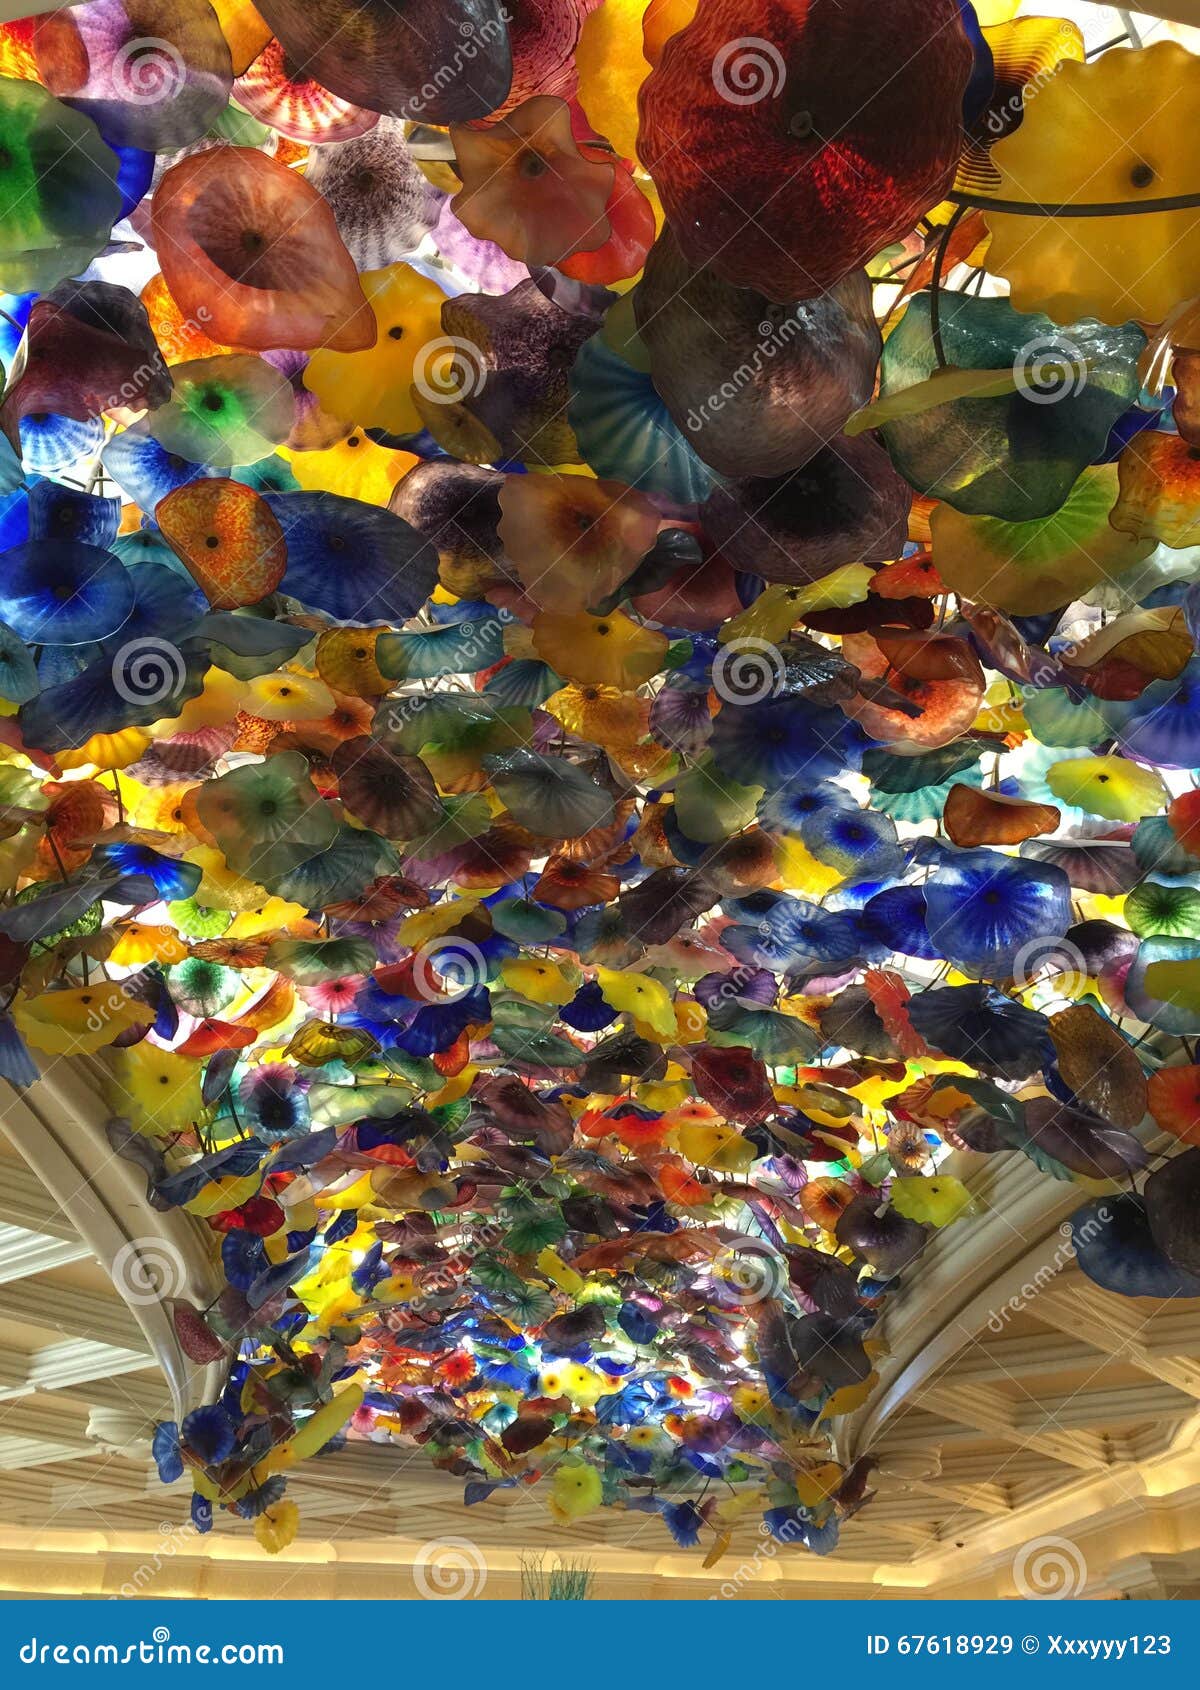 Bellagio Lobby Ceiling 2015 Editorial Stock Image Image Of Glass